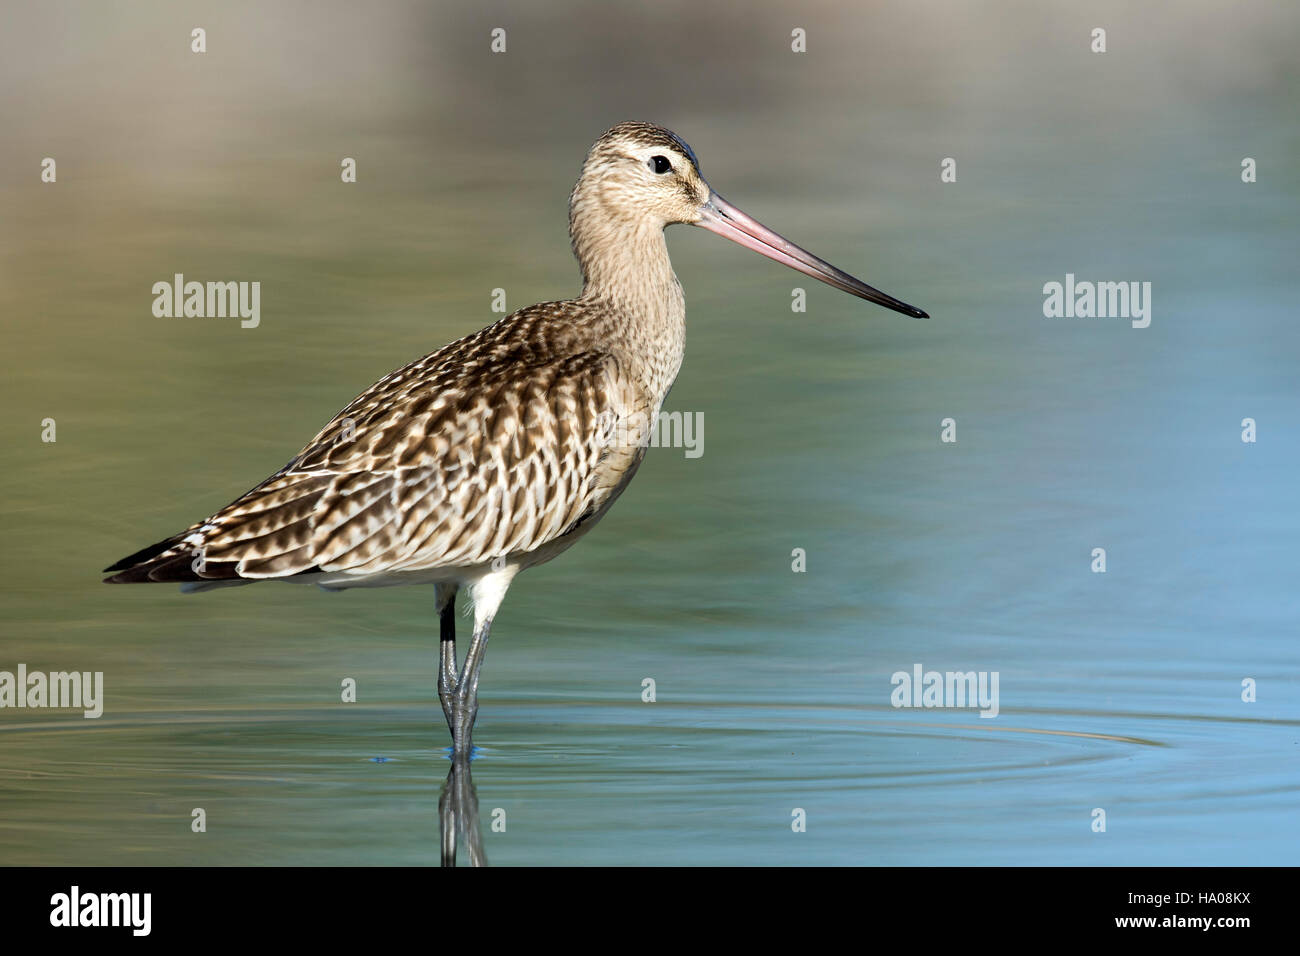 Bar-tailed godwit (Limosa lapponica) in water, Lake Constance, Vorarlberg, Austria Stock Photo